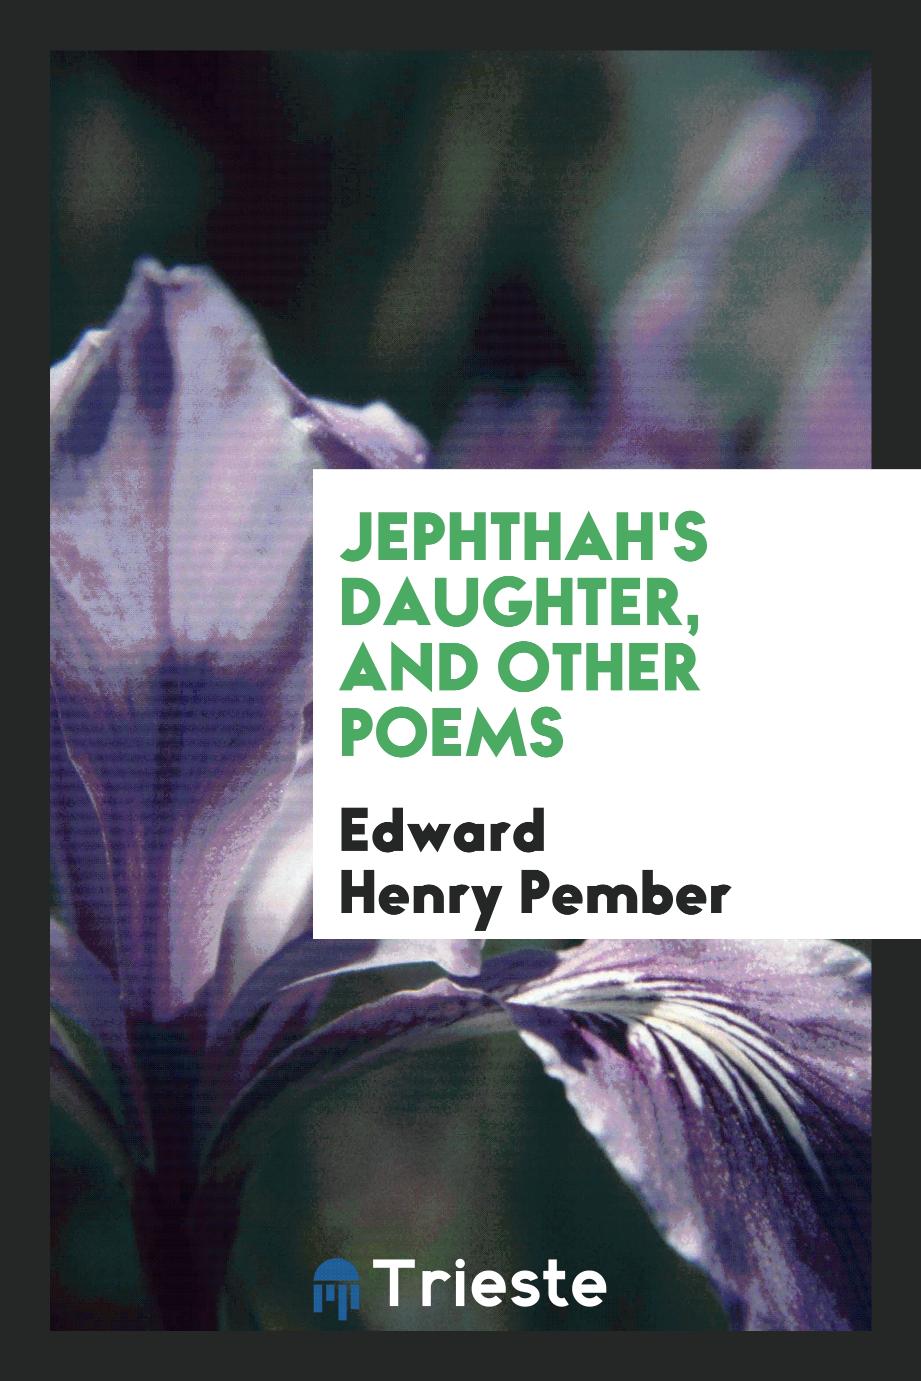 Jephthah's daughter, and other poems